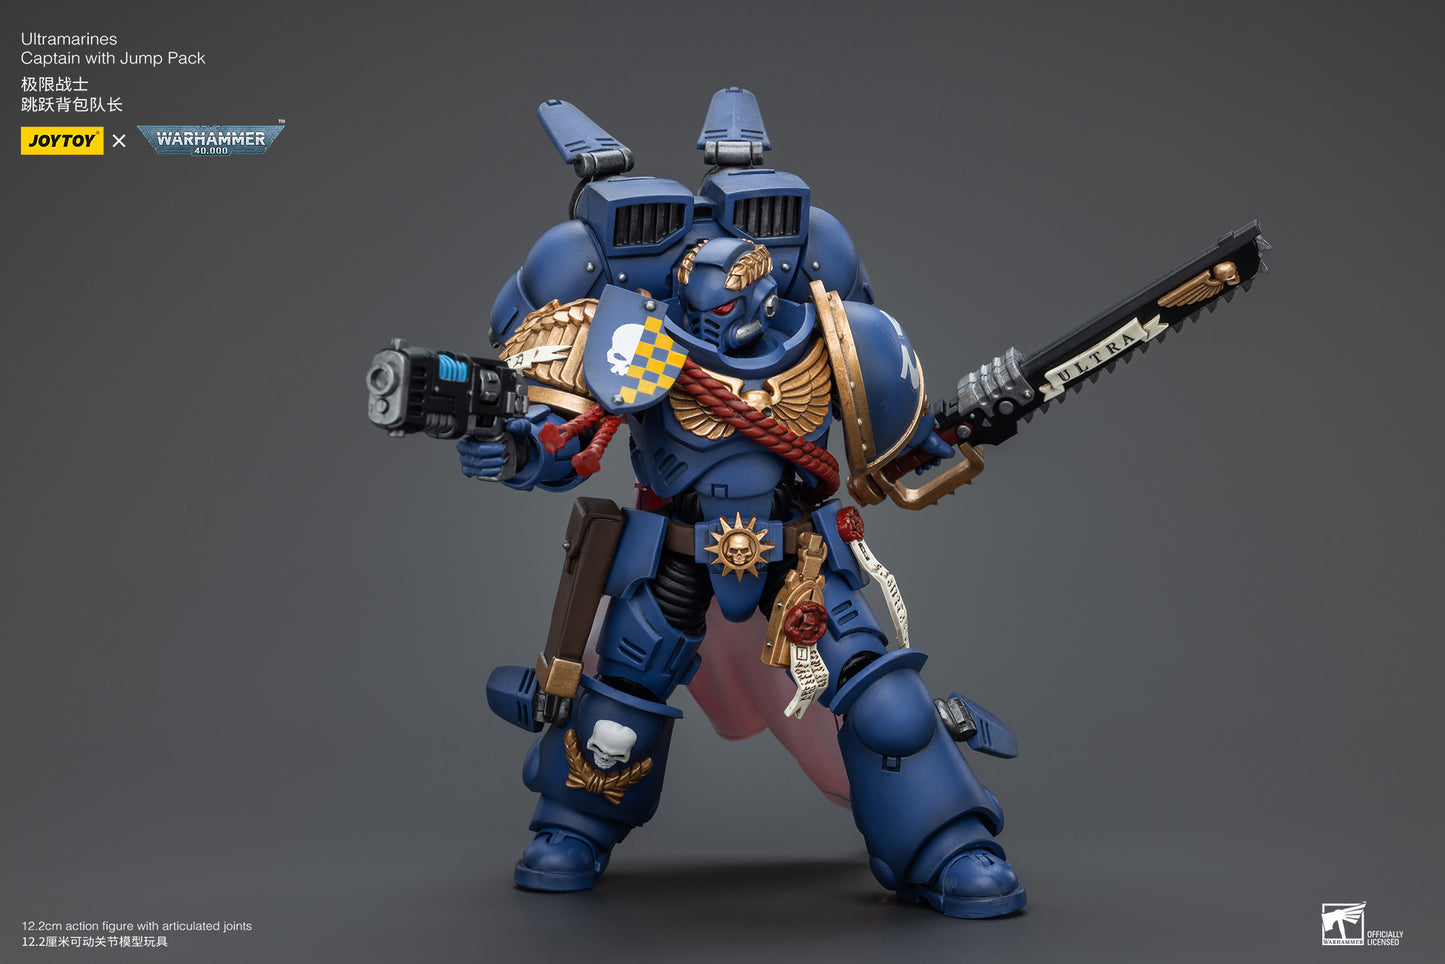 Ultramarines Captain With Jump Pack - Warhammer 40K Action Figure By JOYTOY